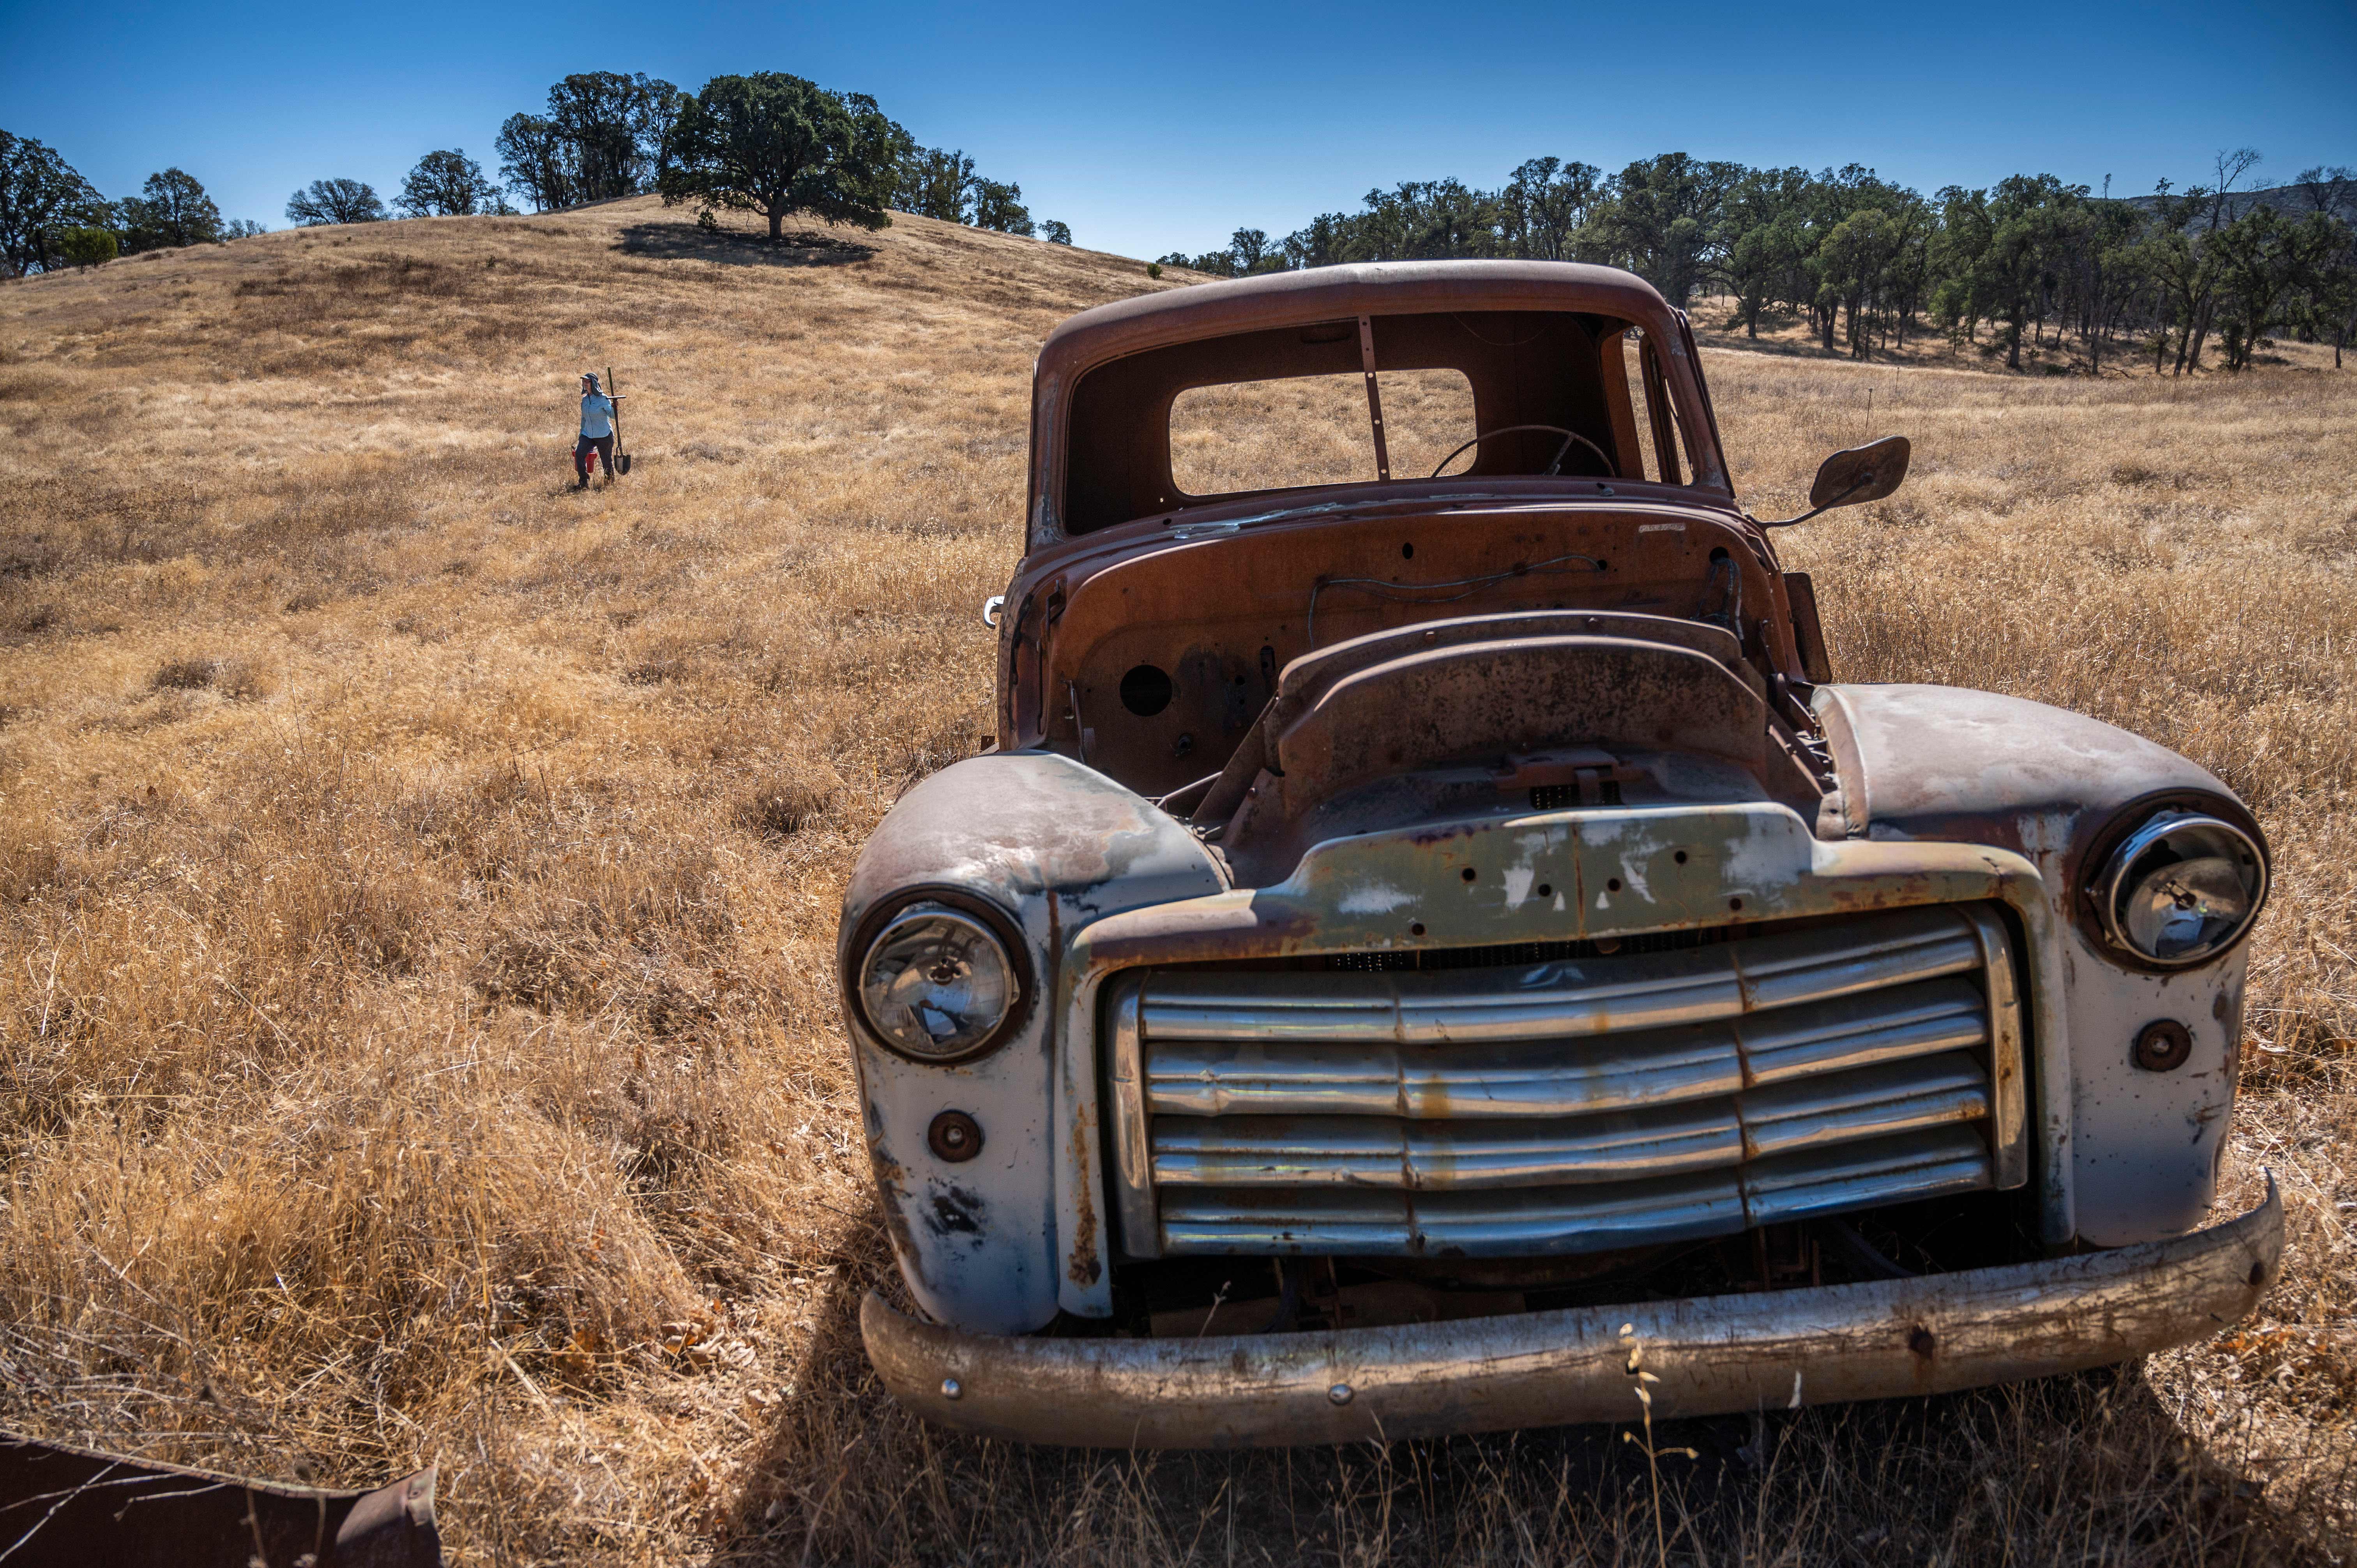 An abandoned truck in the UC Davis’ McLaughlin Nature Preserve in Lake County. Joanne Emerson, UC Davis an assistant professor in the Department of Plant Pathology, walks in the background.